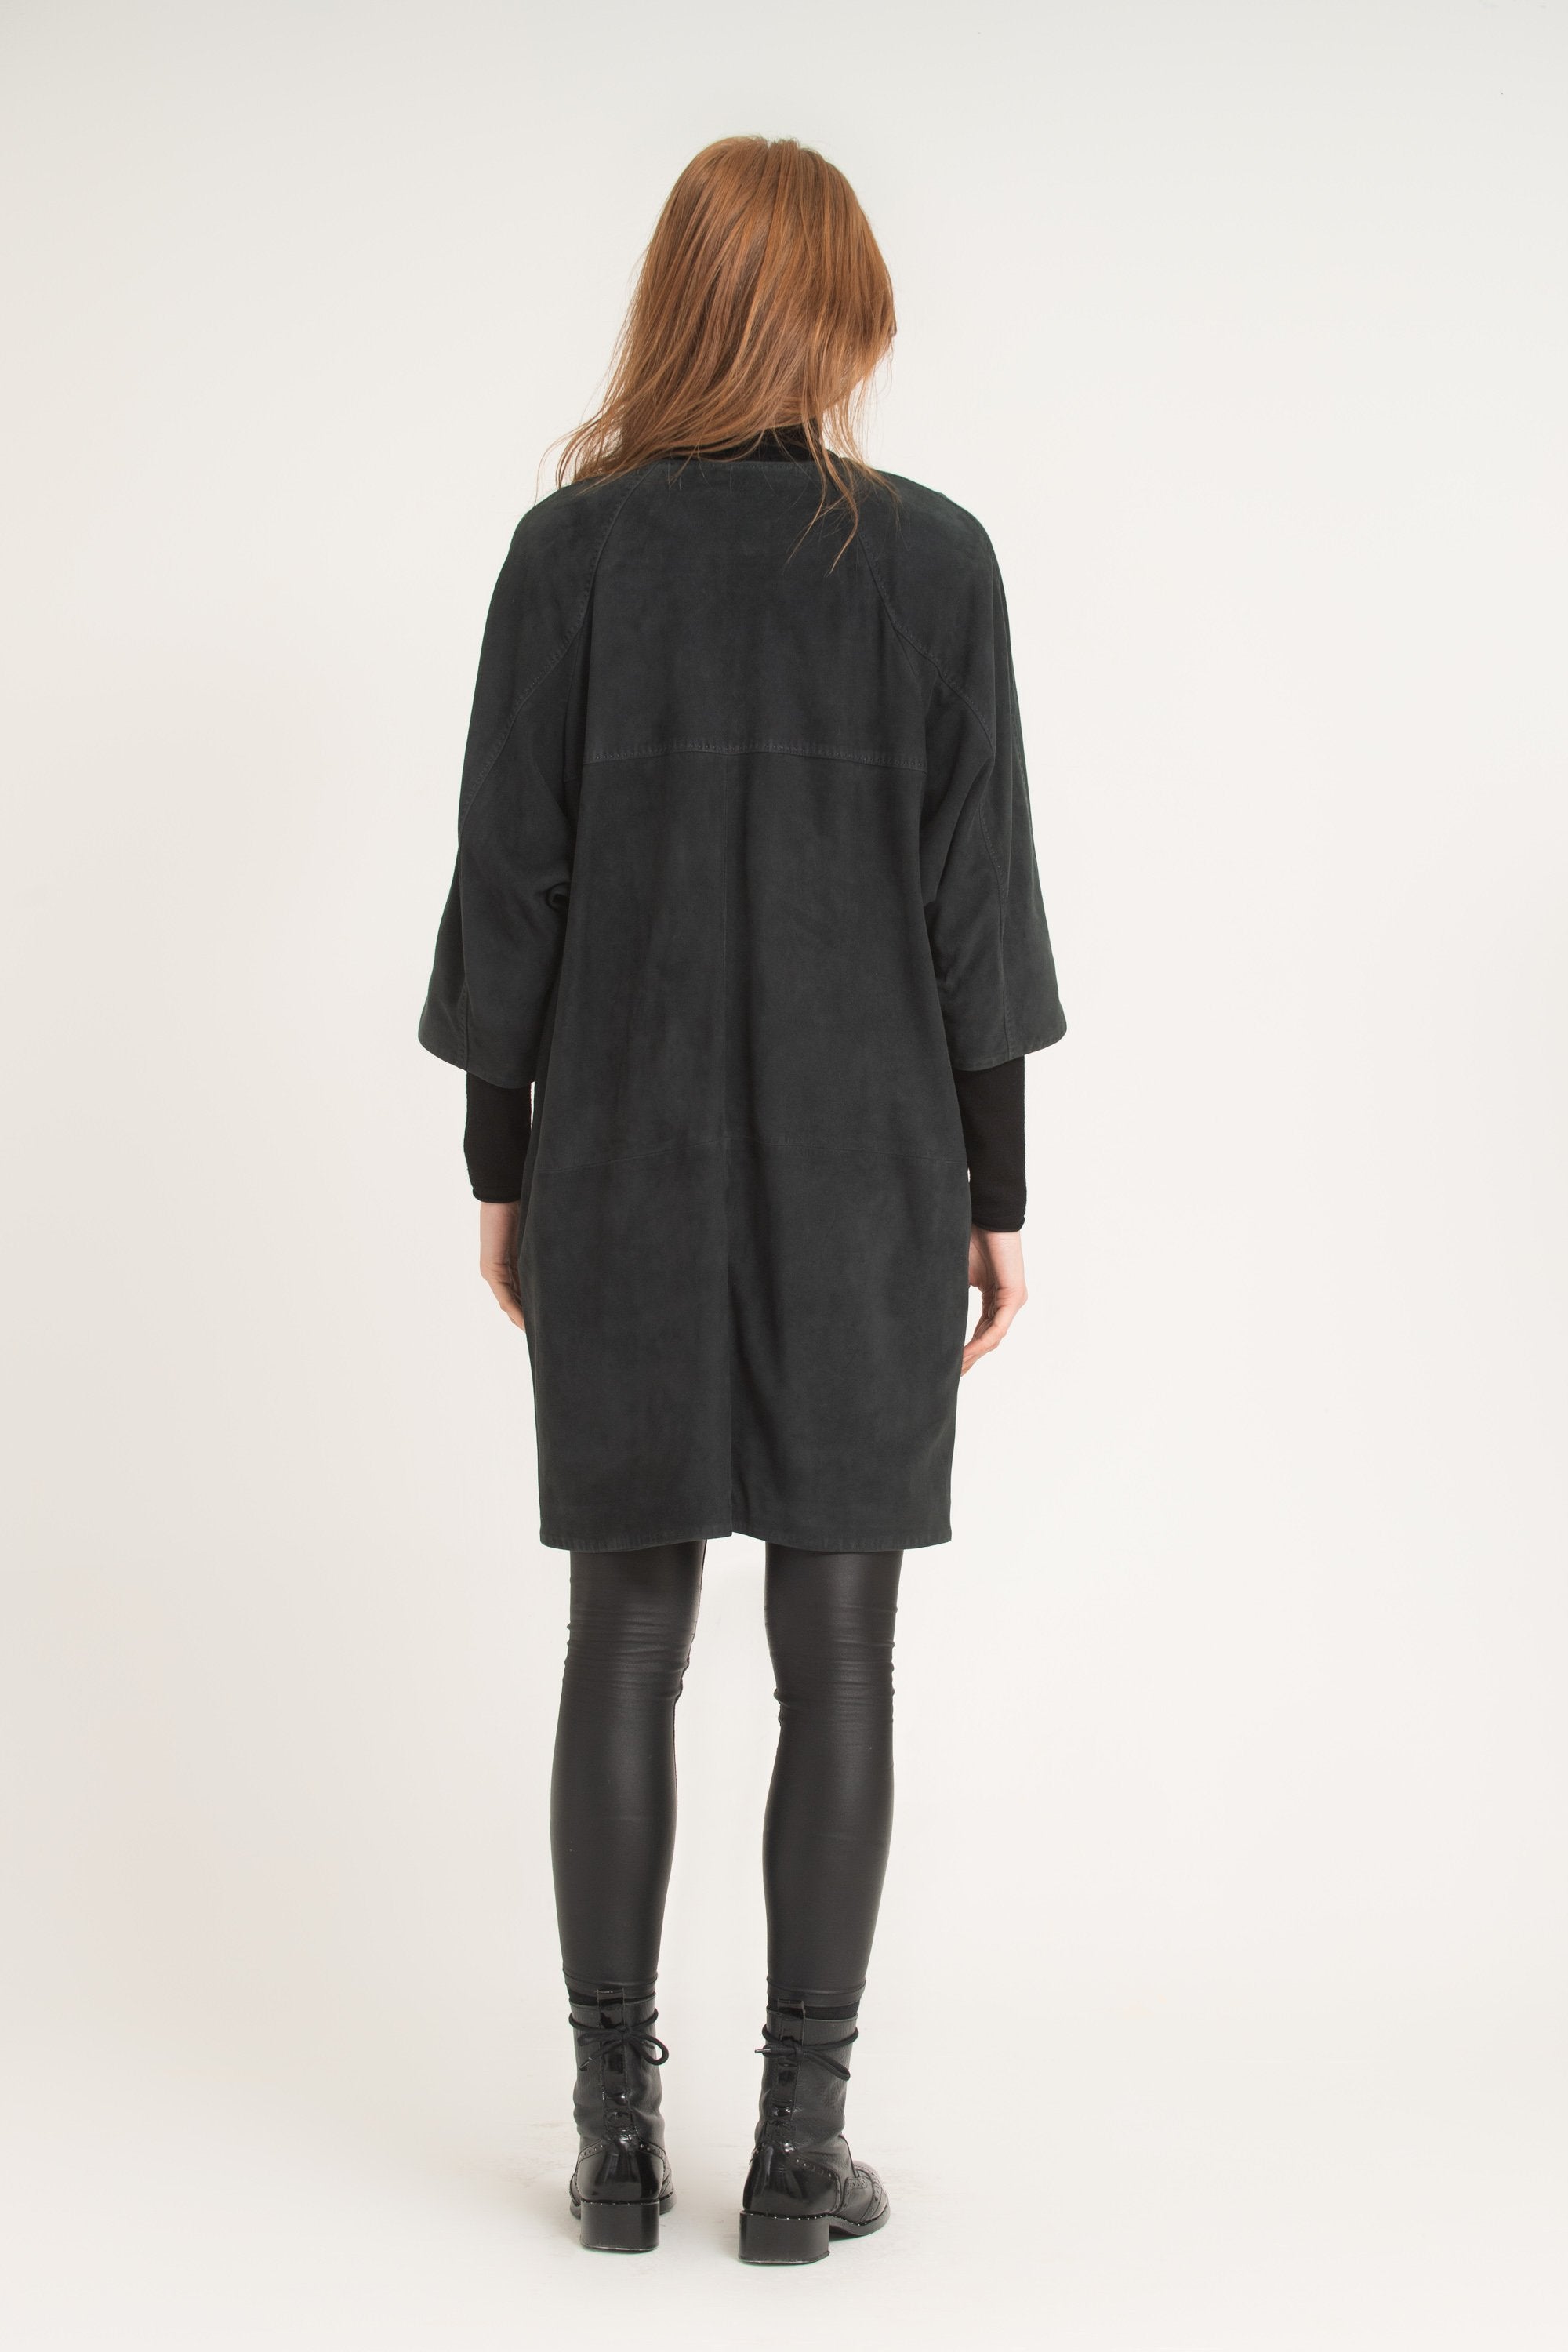 Black Long Suede Leather Coat